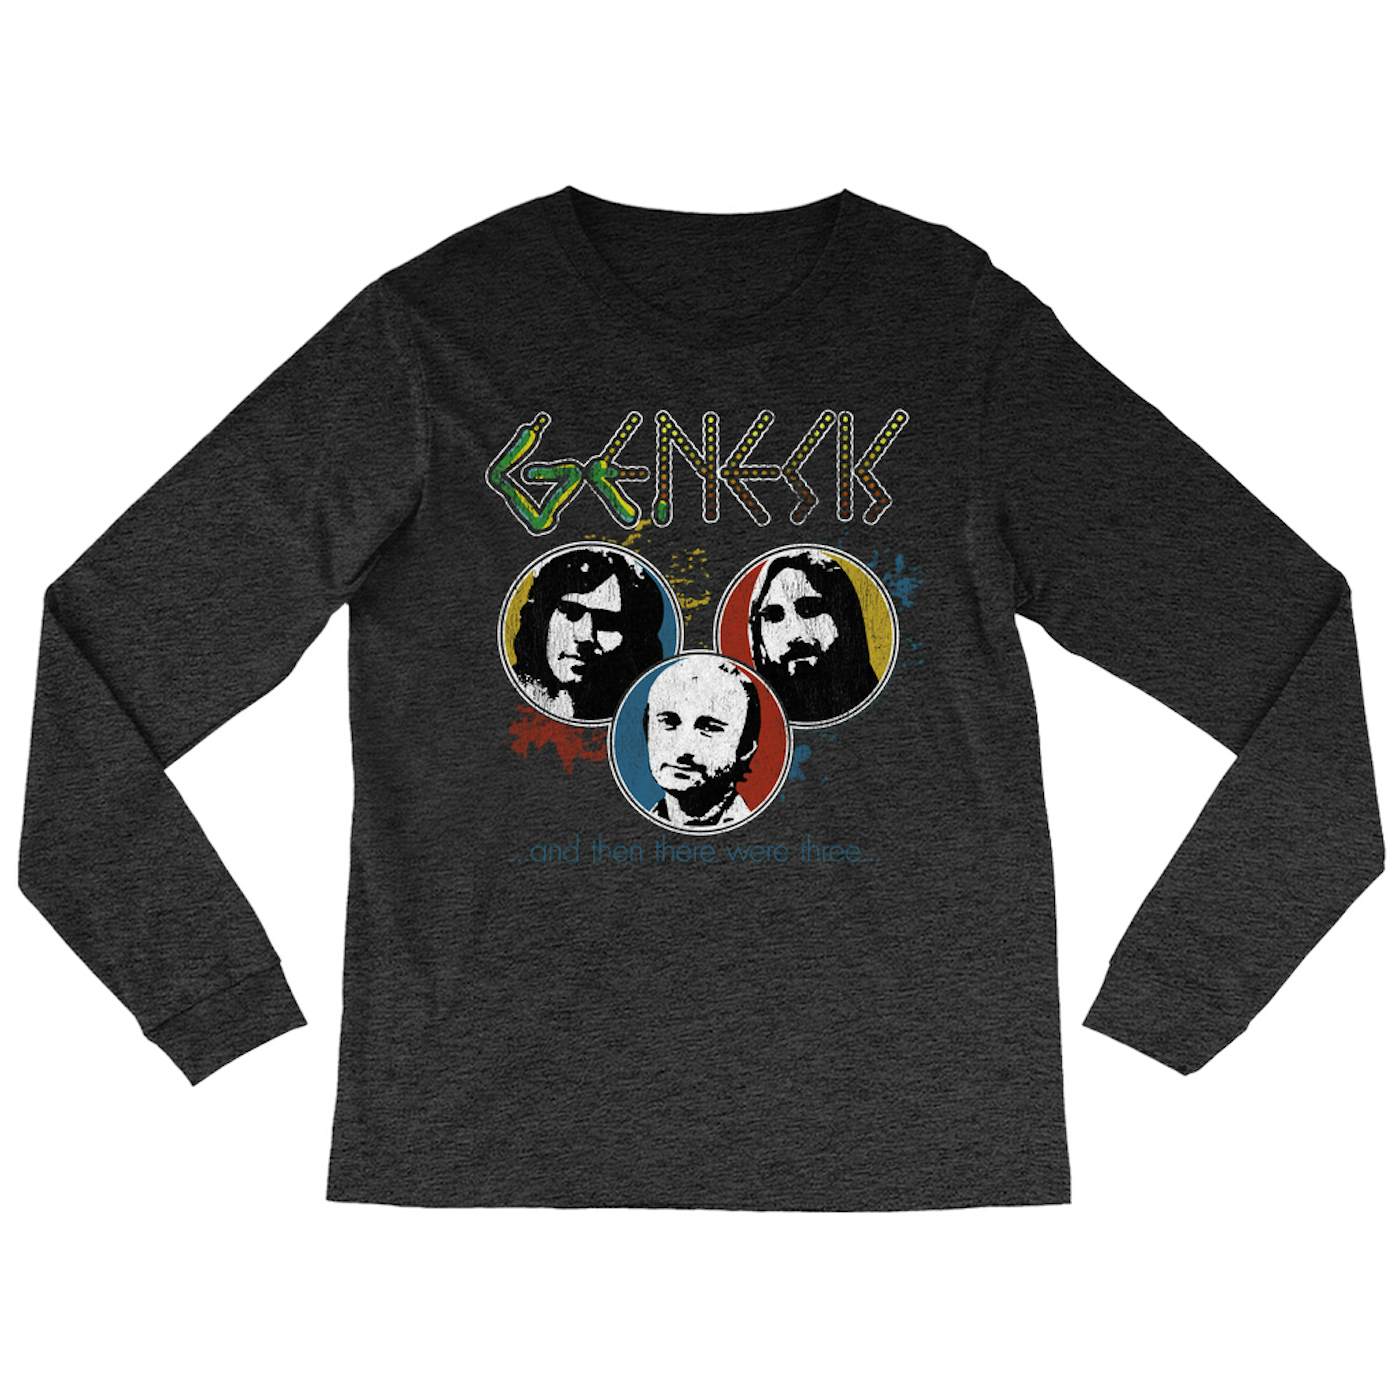 Genesis Long Sleeve Shirt | And Then There Were Three Design Distressed Genesis Shirt